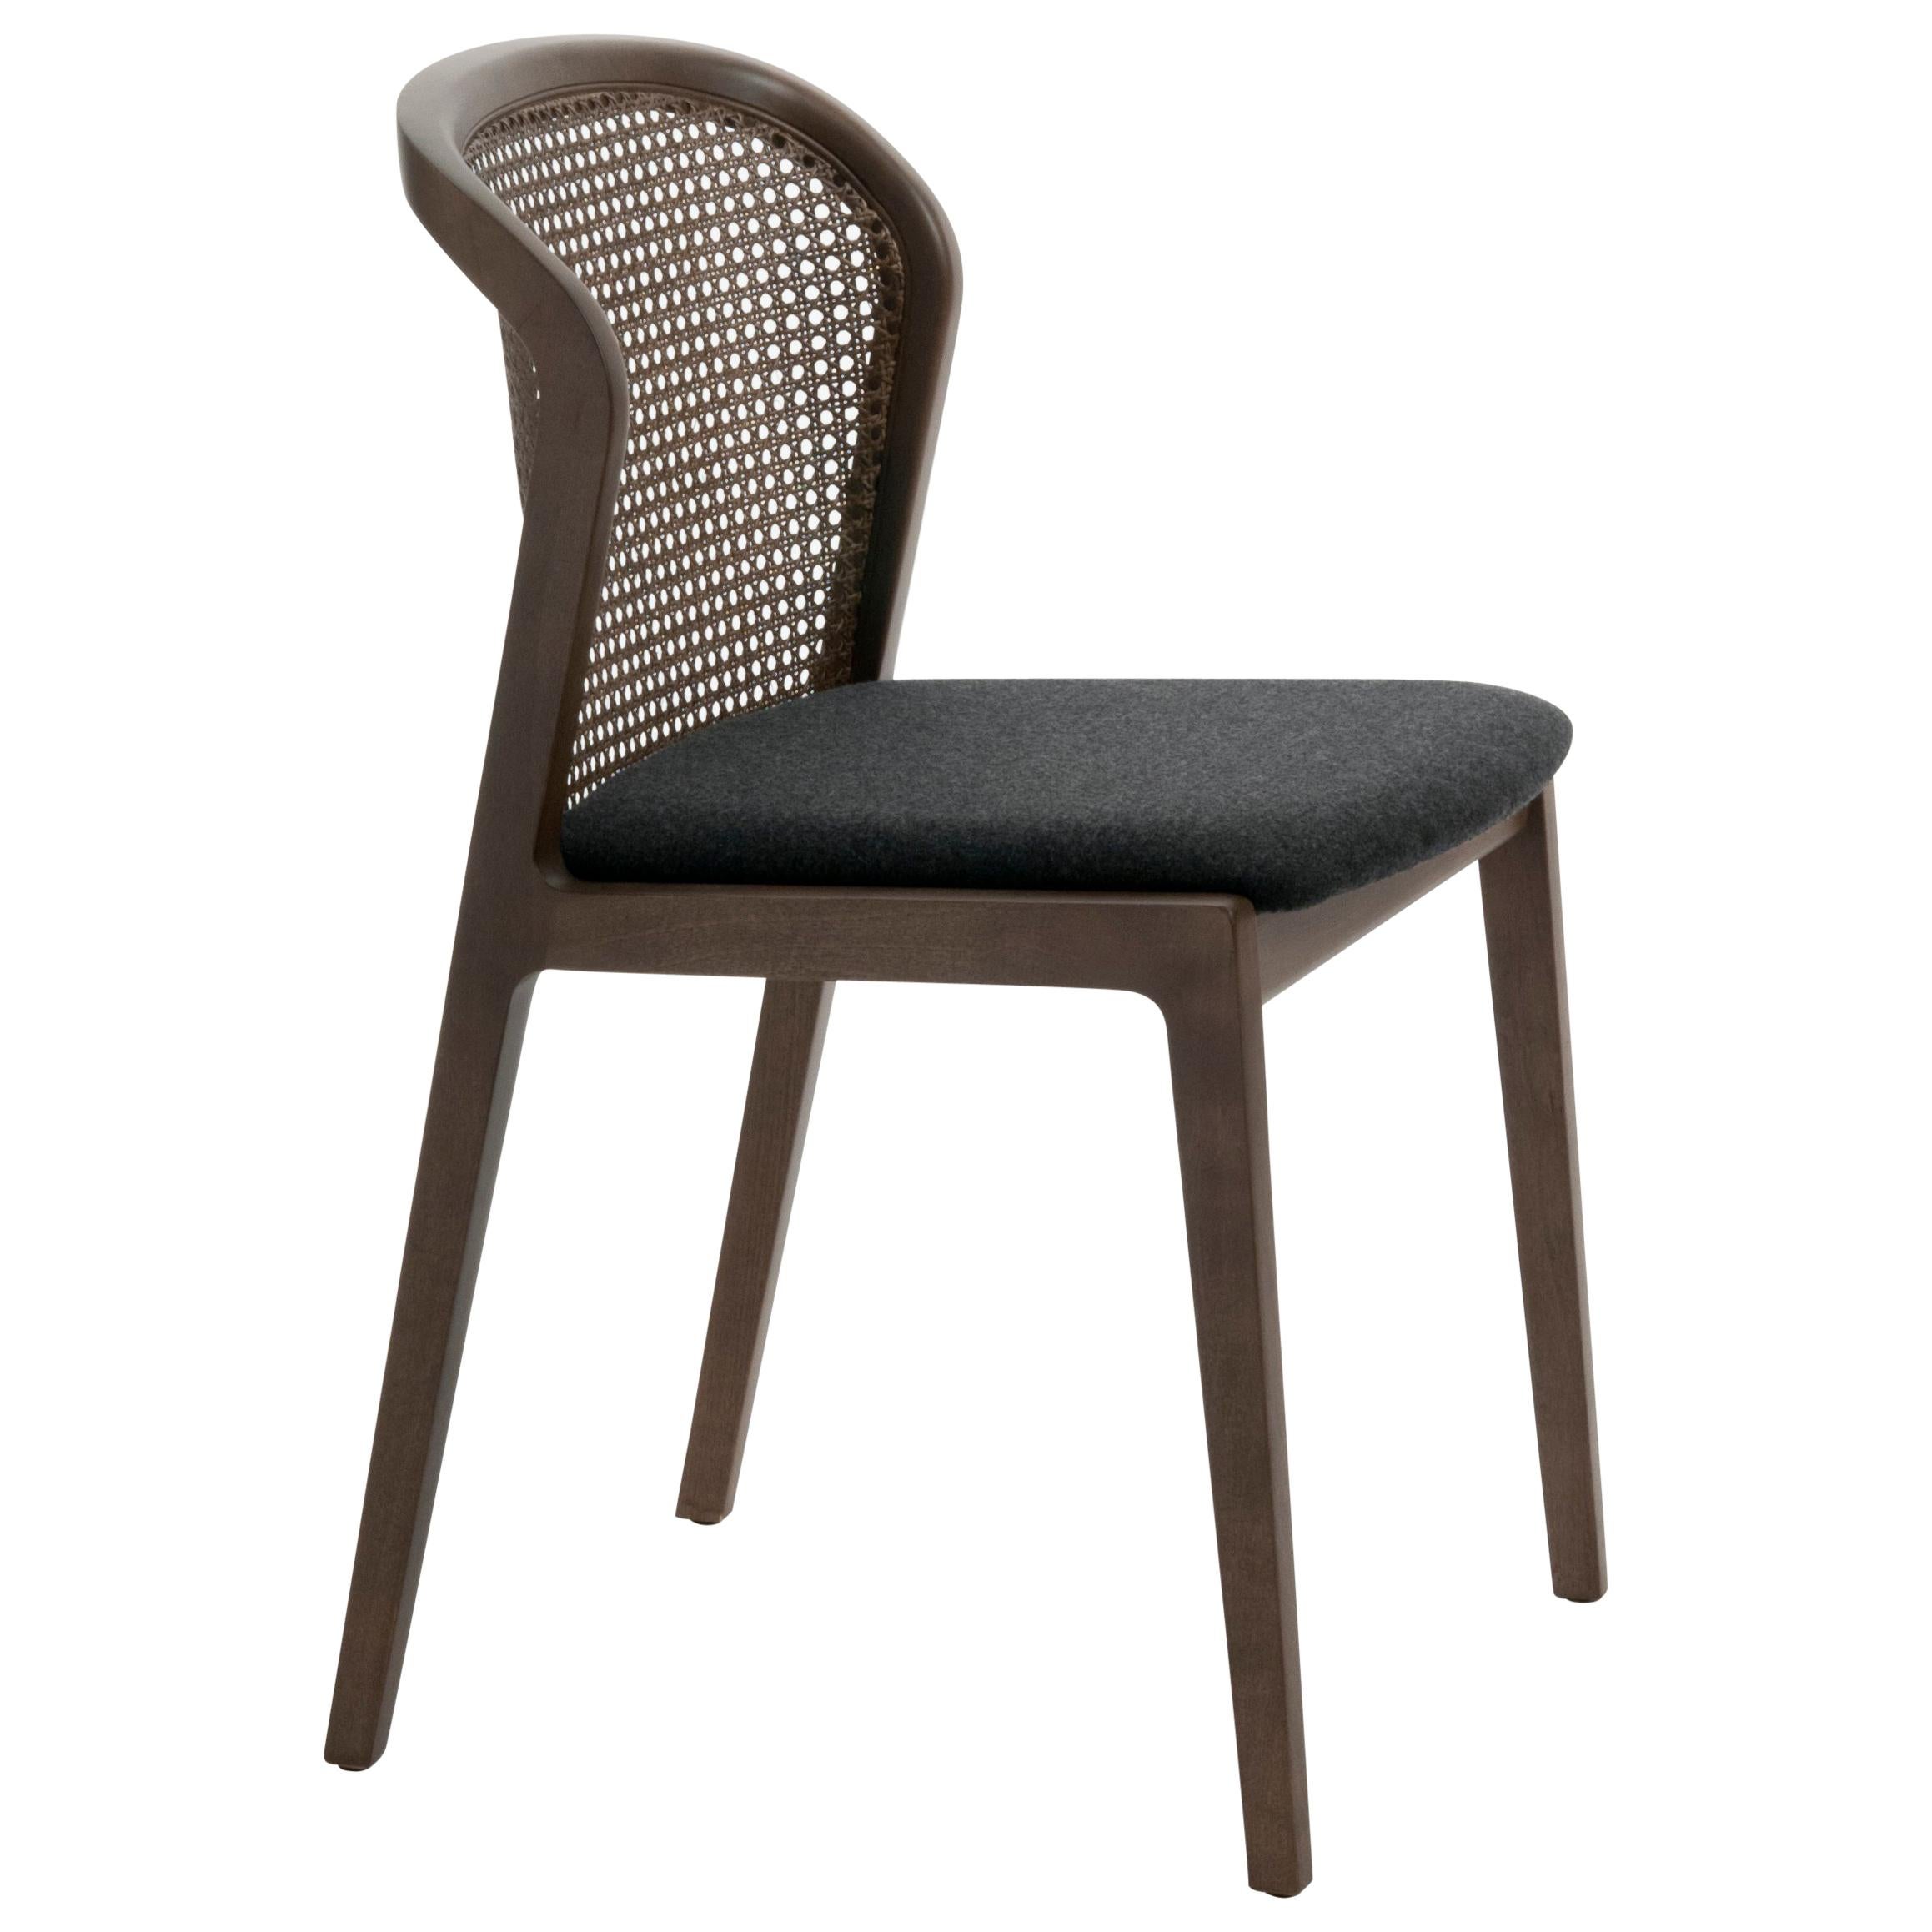 Vienna Chair in Walnut and Straw, Black Felt Upholstered Seat. Made in Italy